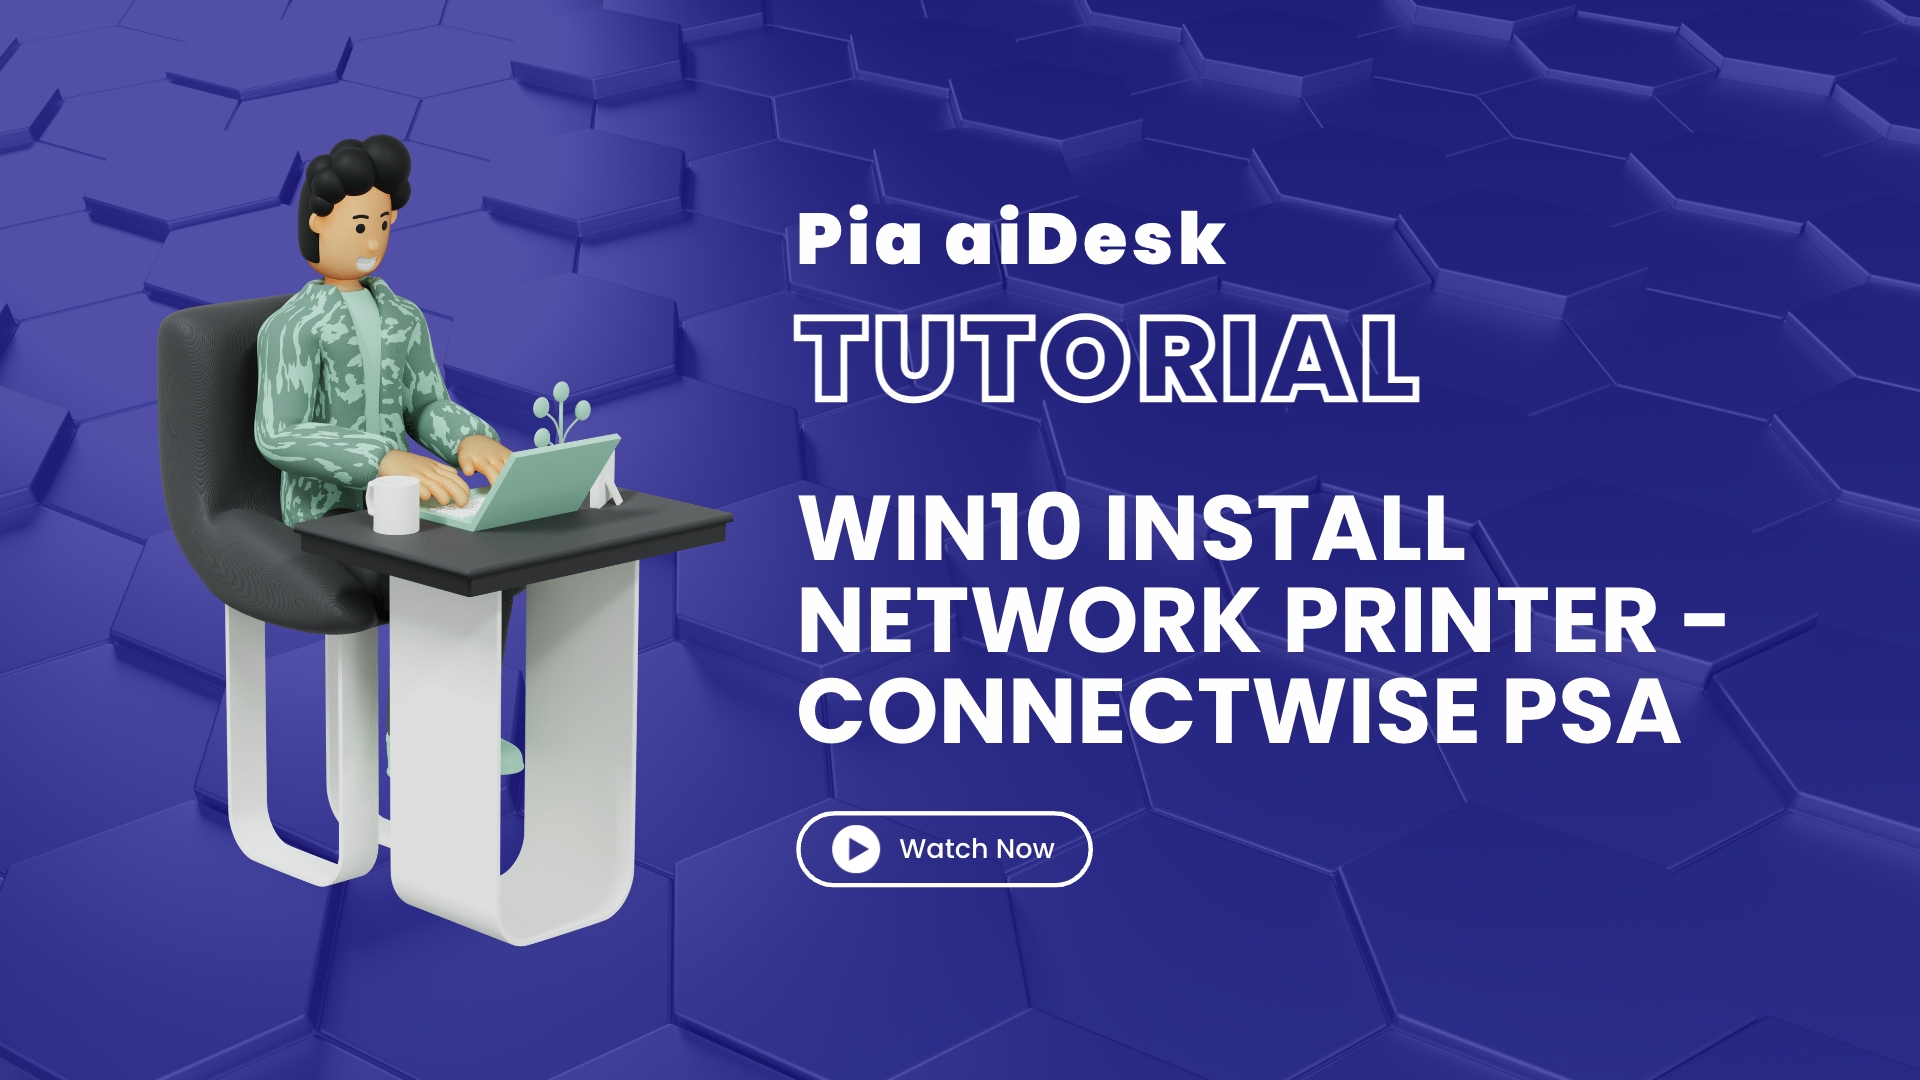 How to Install a Network Printer on a Windows Device With Pia aiDesk in ConnectWise